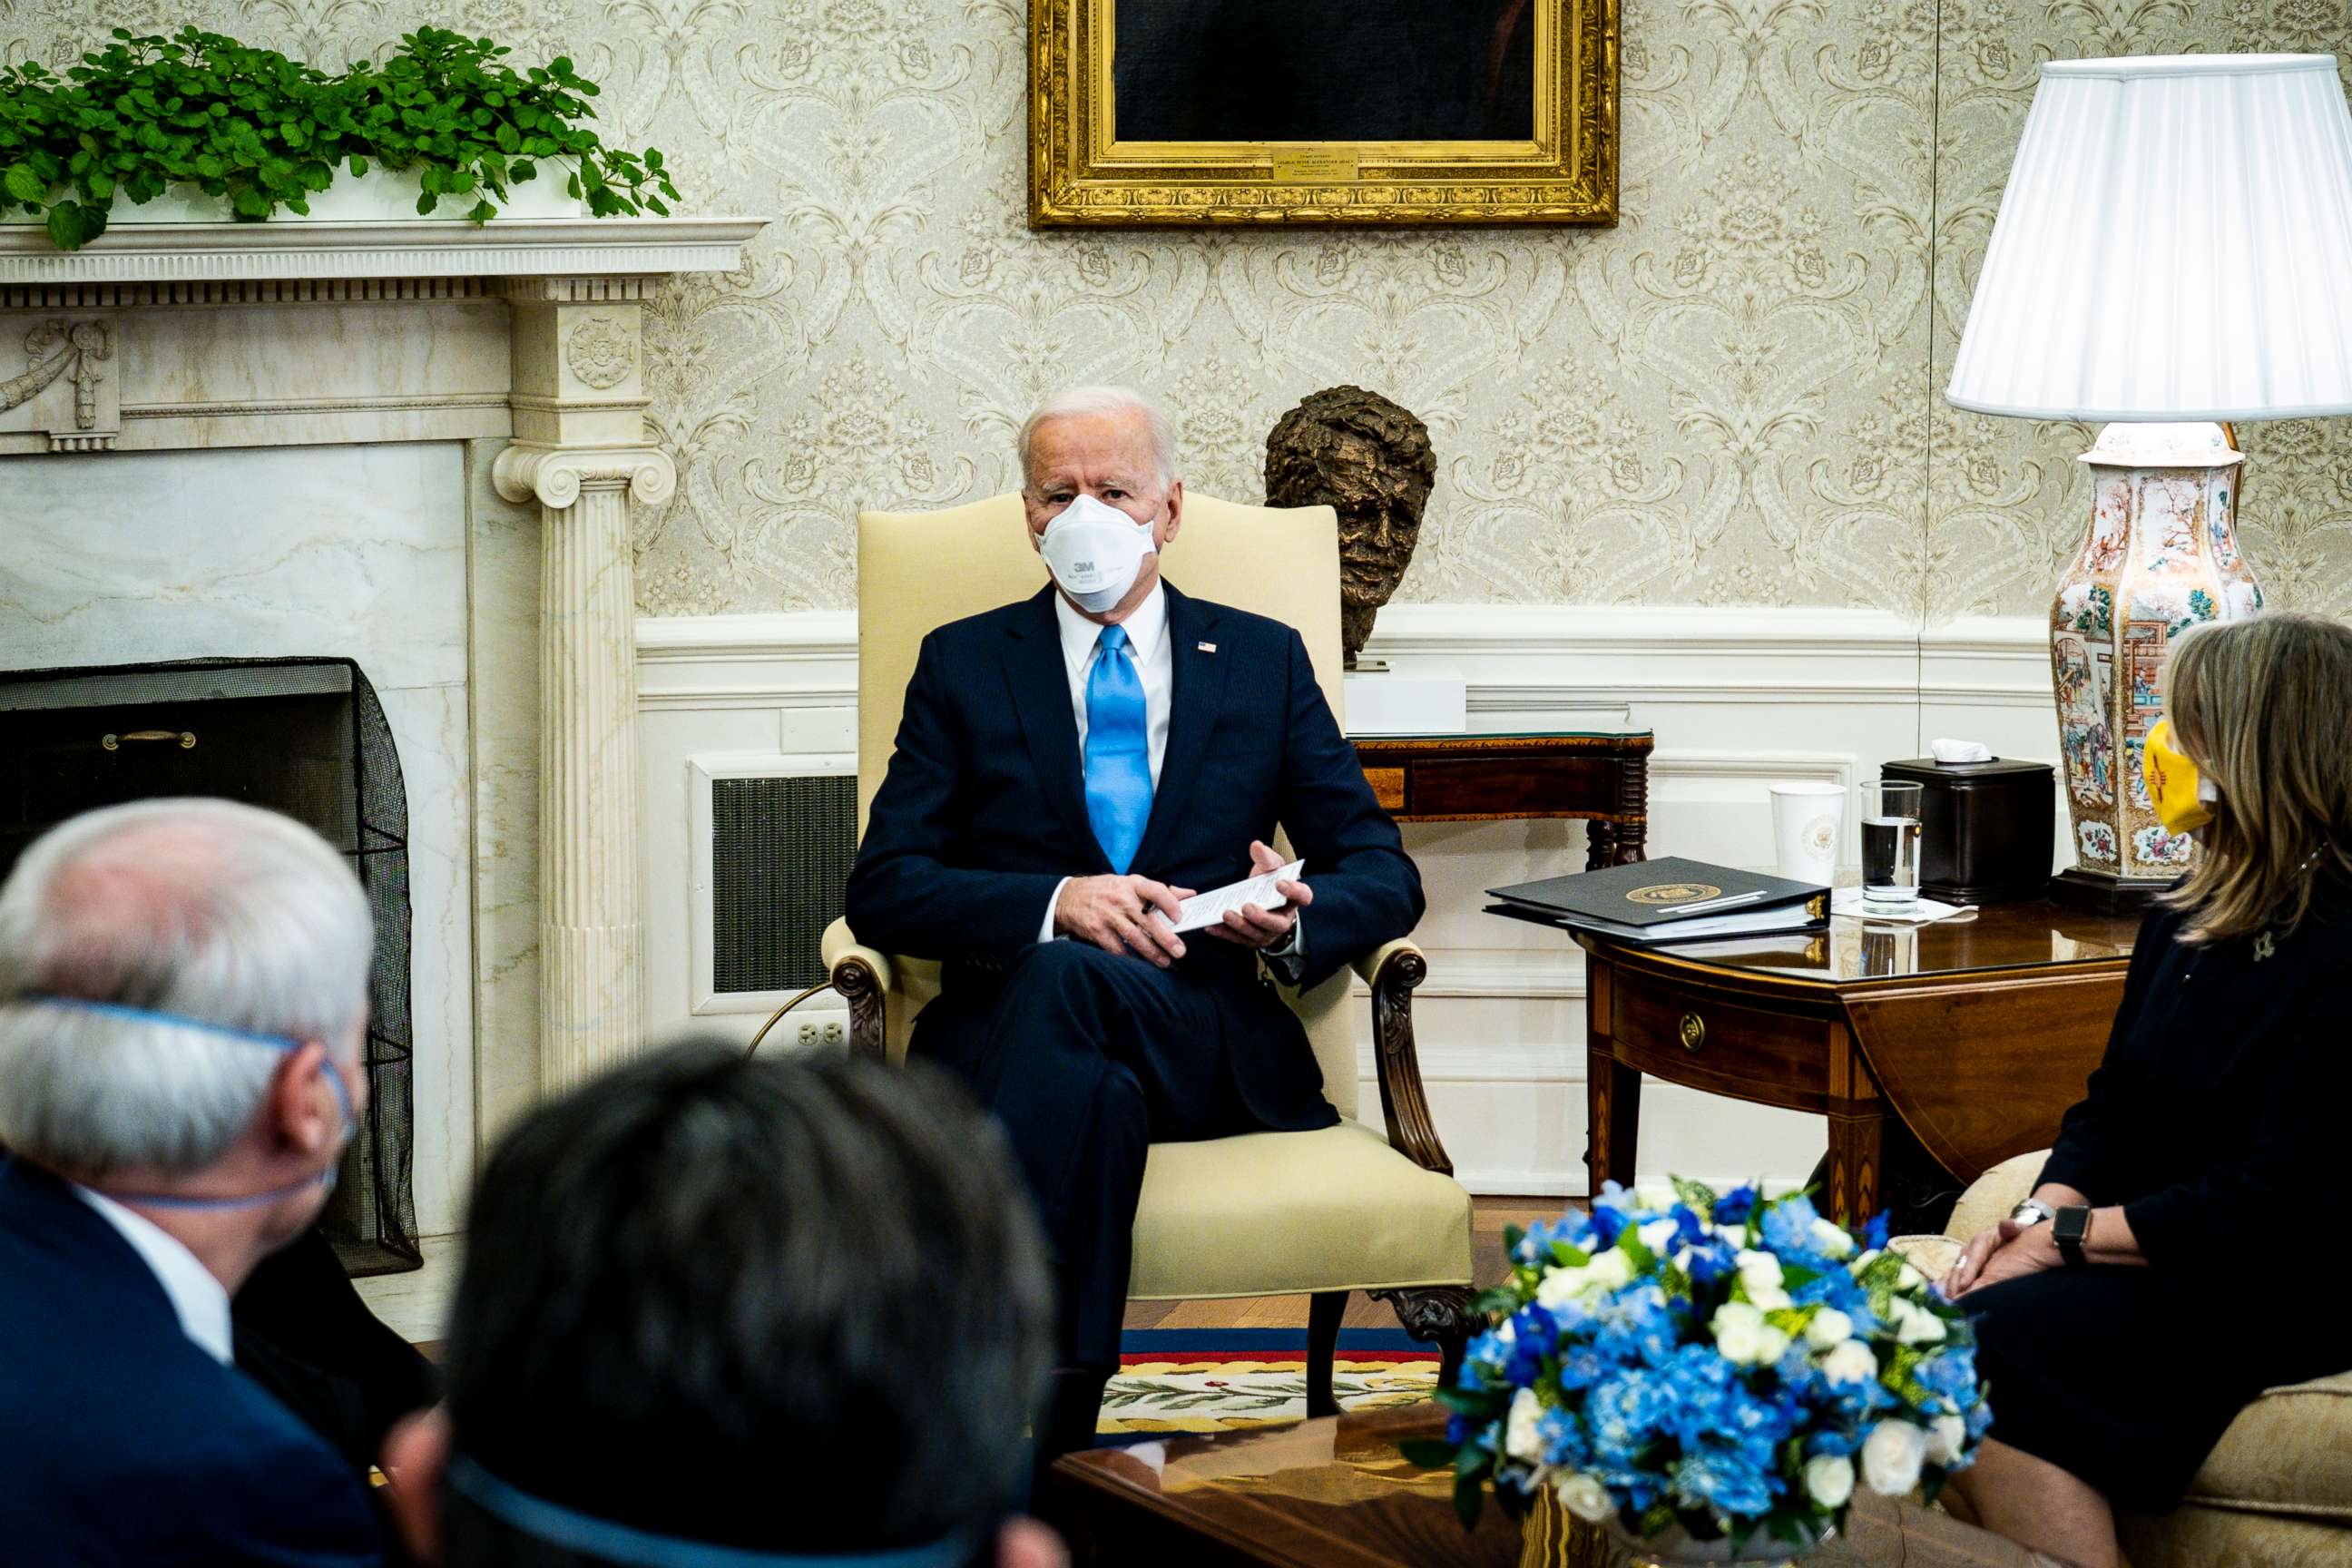 PHOTO: President Joe Biden meets with governors and mayors in the Oval Office of the White House in Washington on Feb. 12, 2021, to discuss the vital need to pass the American Rescue Plan.